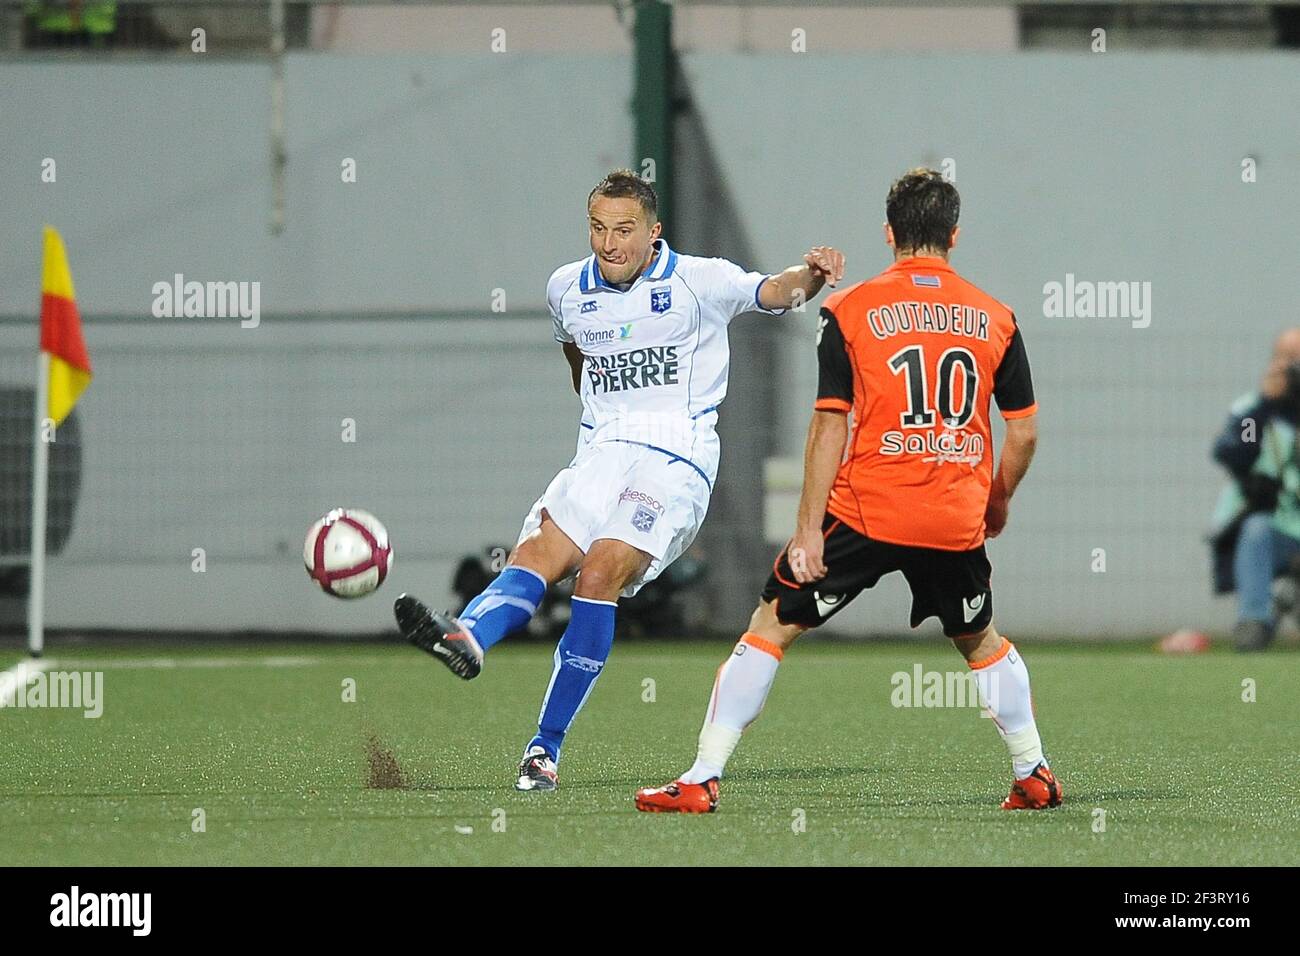 FOOTBALL - FRENCH CHAMPIONSHIP 2011/2012 - L1 - FC LORIENT v AJ AUXERRE - 21/09/2011 - PHOTO PASCAL ALLEE / DPPI - DARIUSZ DUDKA (AJA) / MATHIEU COUTADEUR (FCL) Stock Photo